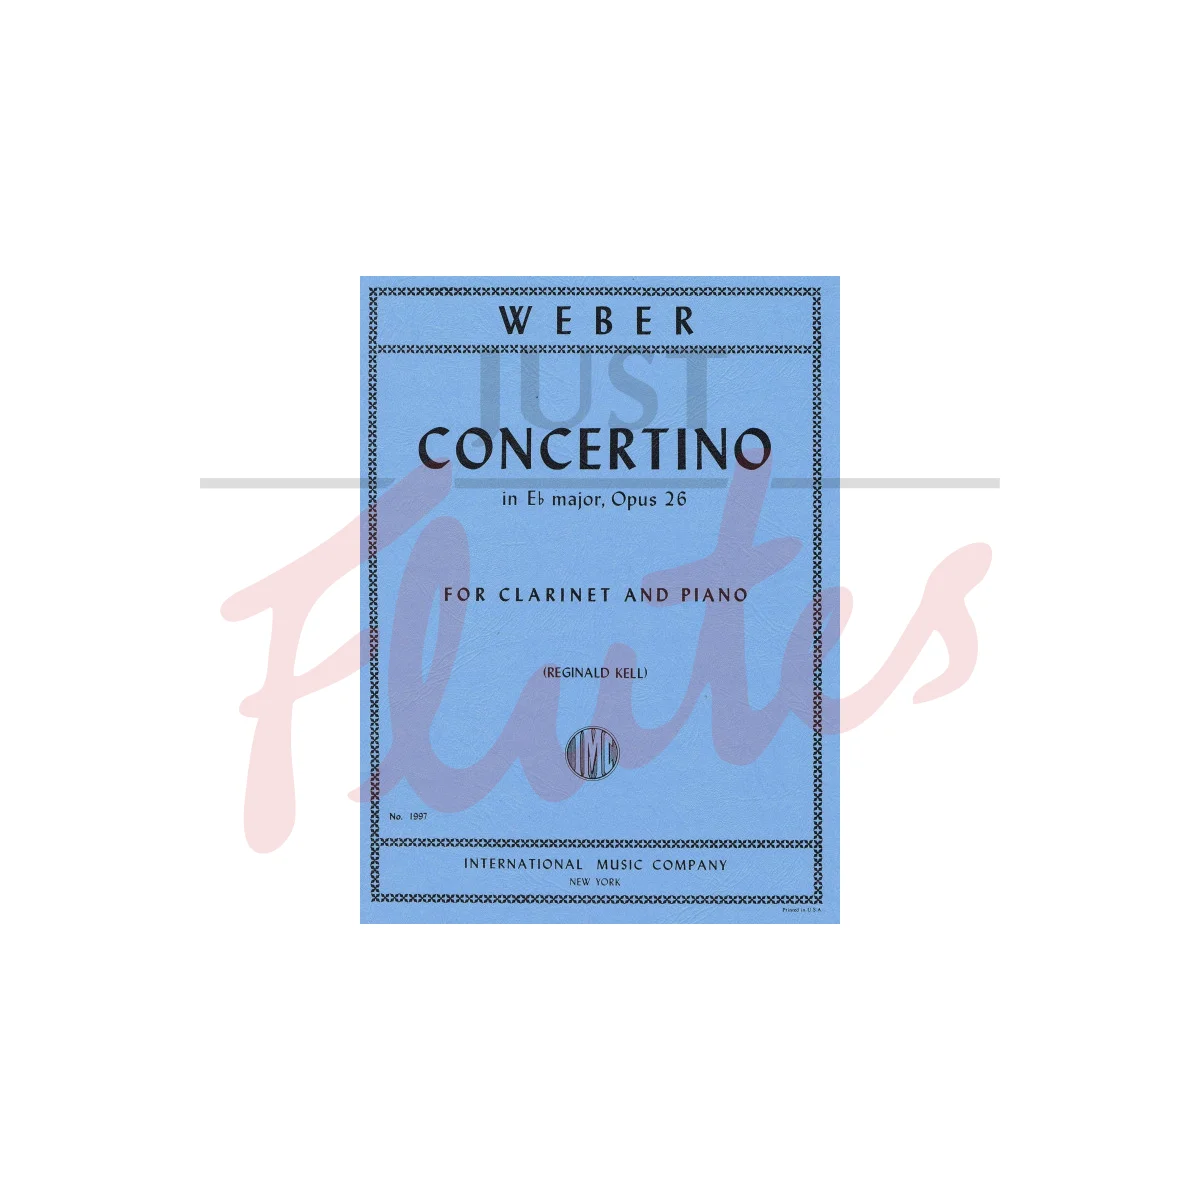 Concertino in Eb major for Clarinet and Piano